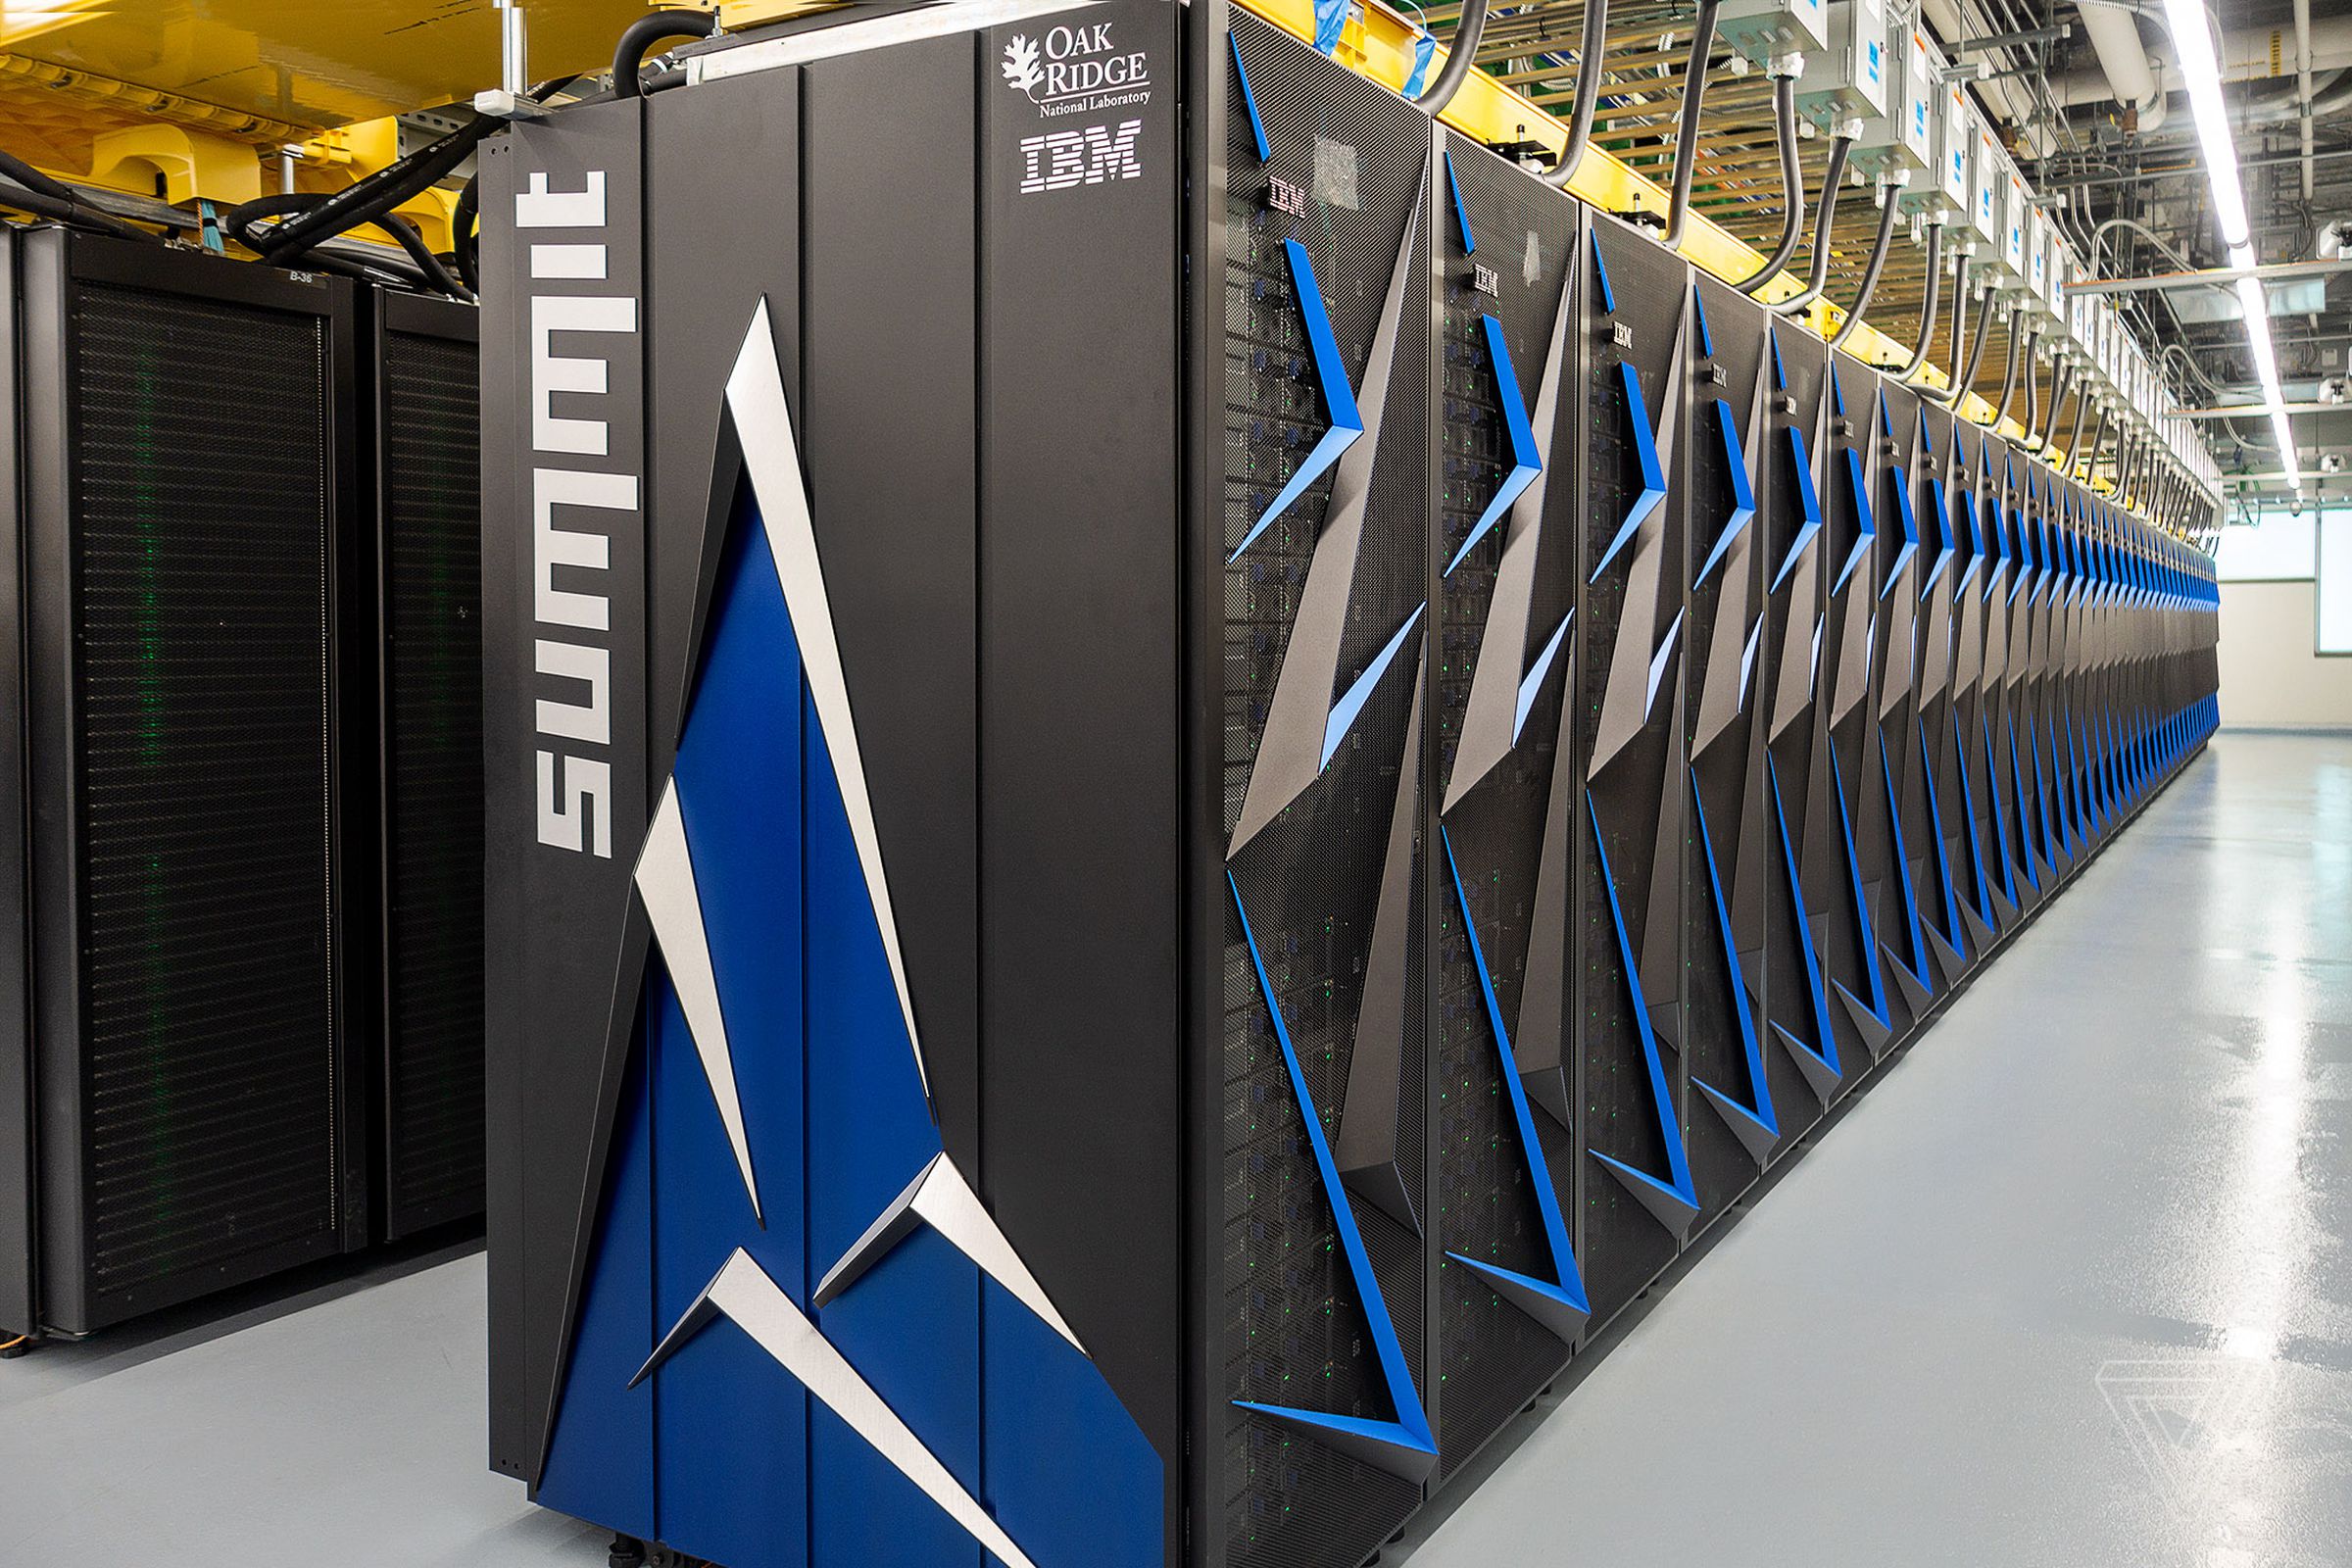 The world’s current fastest supercomputer is Summit, also housed at Oak Ridge National Laboratory. 